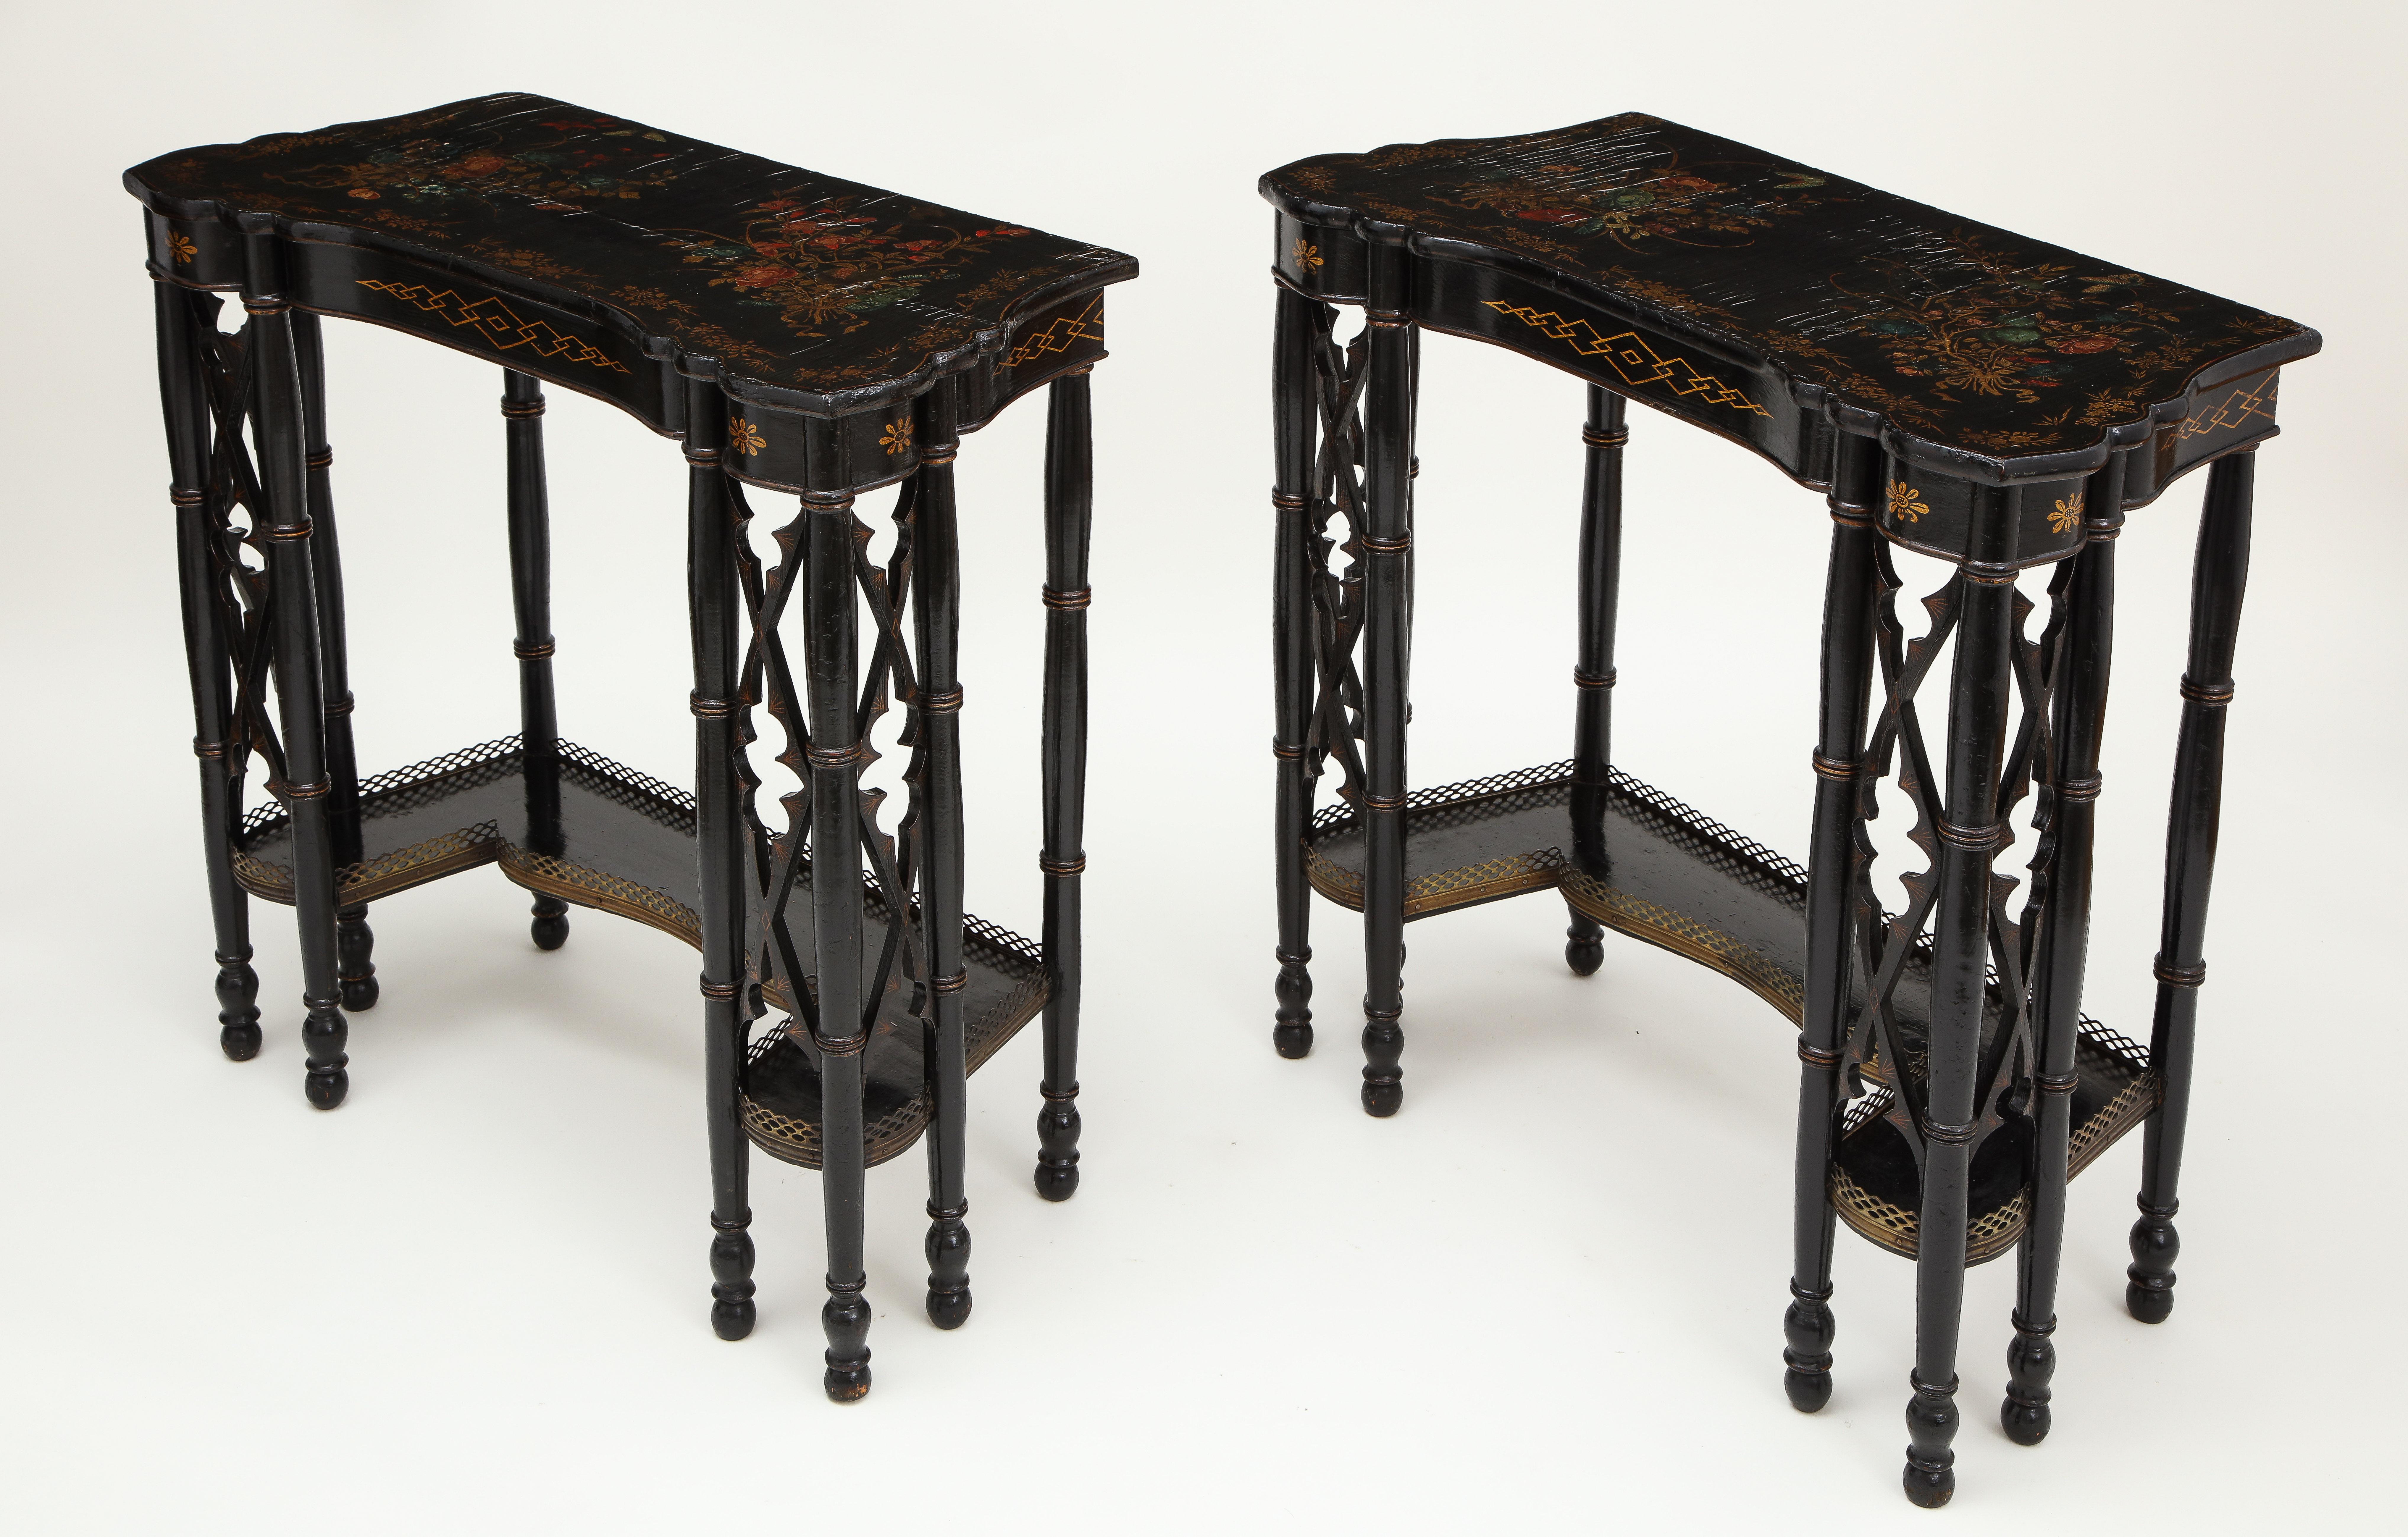 These unusual tables are designed to also be used back to back, and connect to make a square table if desired.

Each with eared slightly incurved tops with polychrome and gilt decoration of summer flowers and butterflies, over a narrow conforming